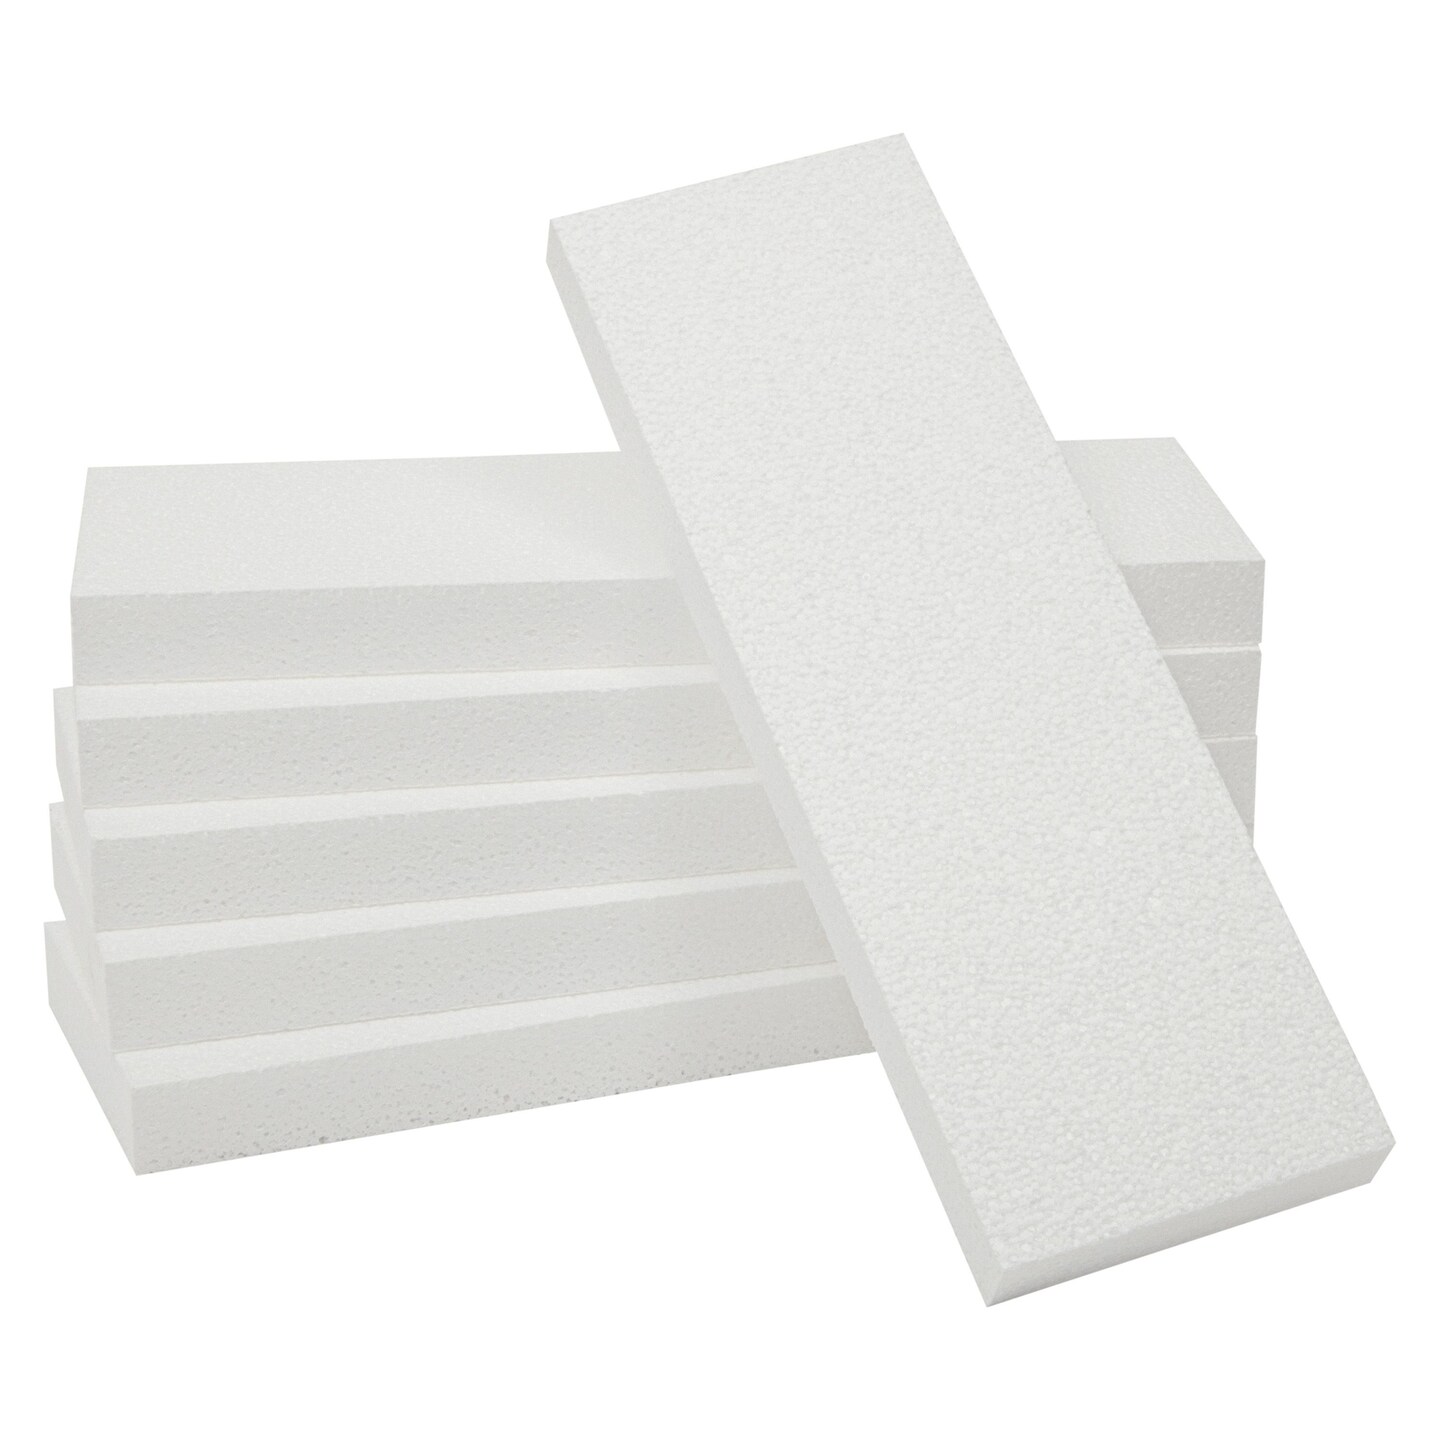 1-inch Thick Foam Board Sheets 6-Pack 17x11 Polystyrene Rectangles for DIY  Projects Arts and